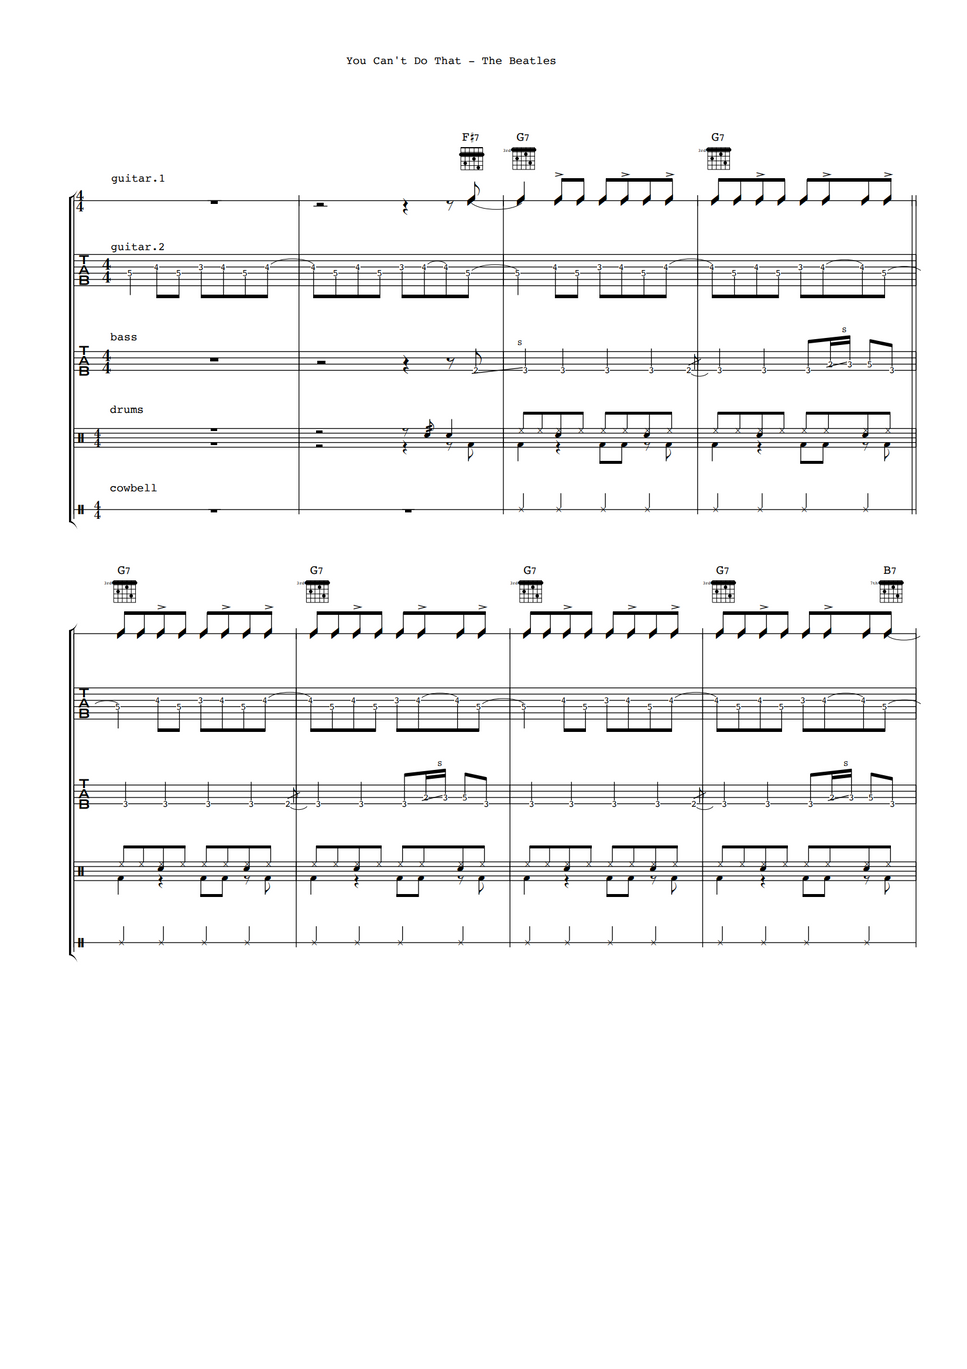 The Beatles - You Can't Do That (Band Score) by Ryohei Kanayama